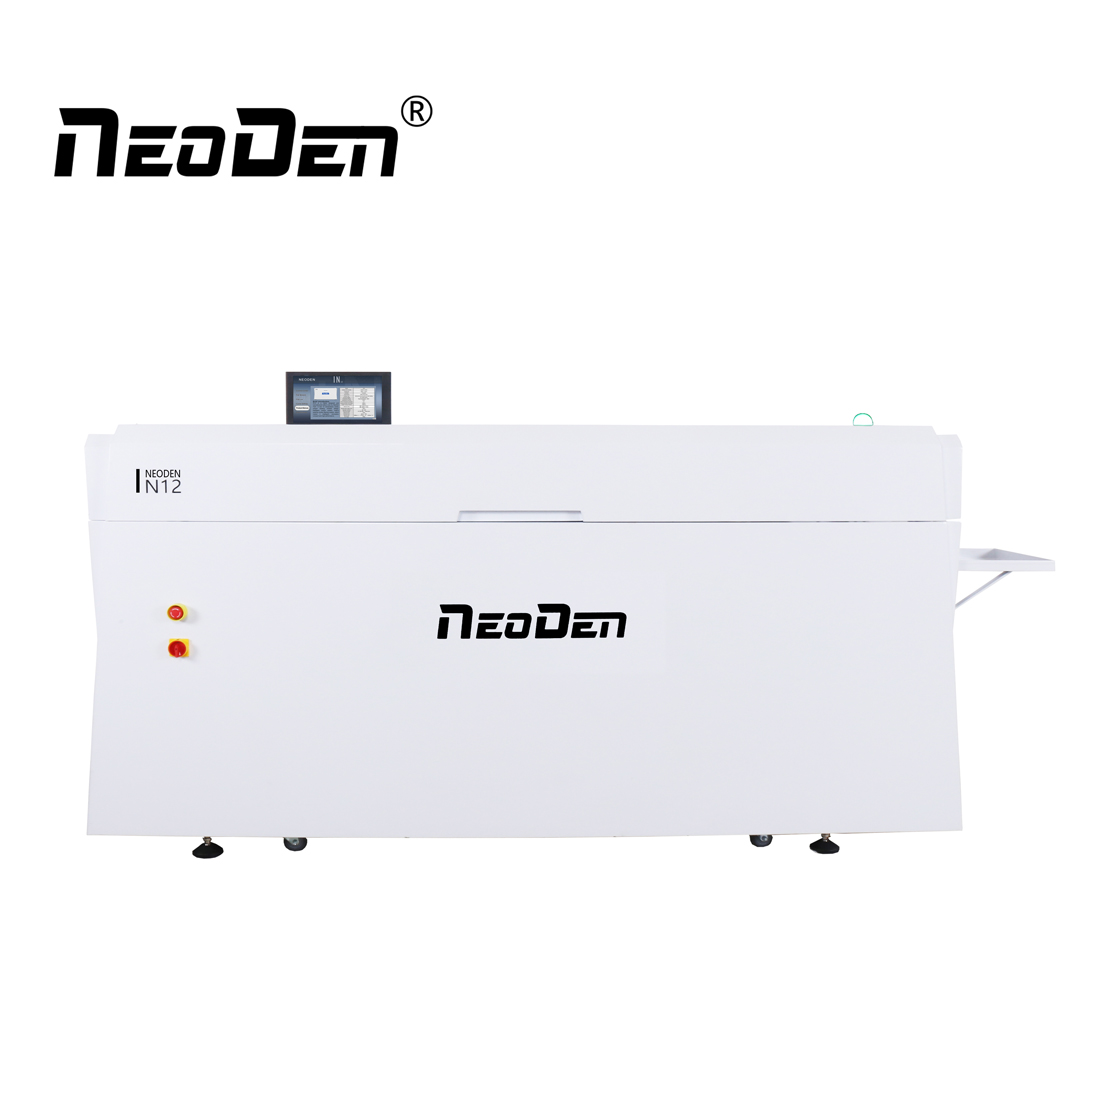 What Is The Role of Nitrogen in Reflow Oven?